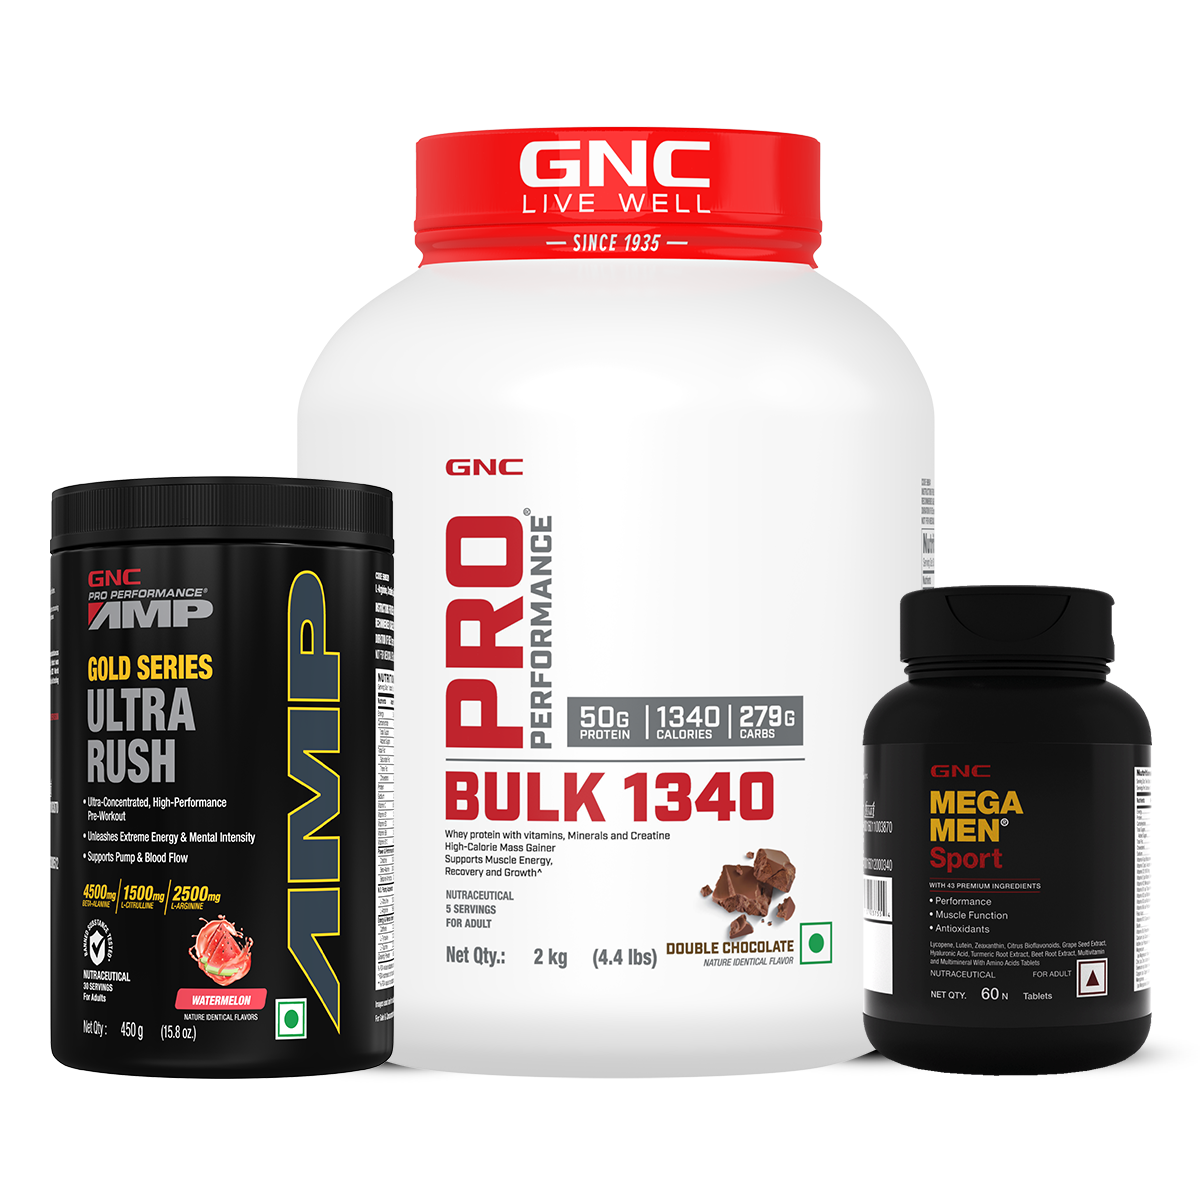 Bulking Combo - For Bulding Muscle Mass | Helps Gain Healthy Weight | Boosts Muscle Recovery | Improves Mental Focus & Energy